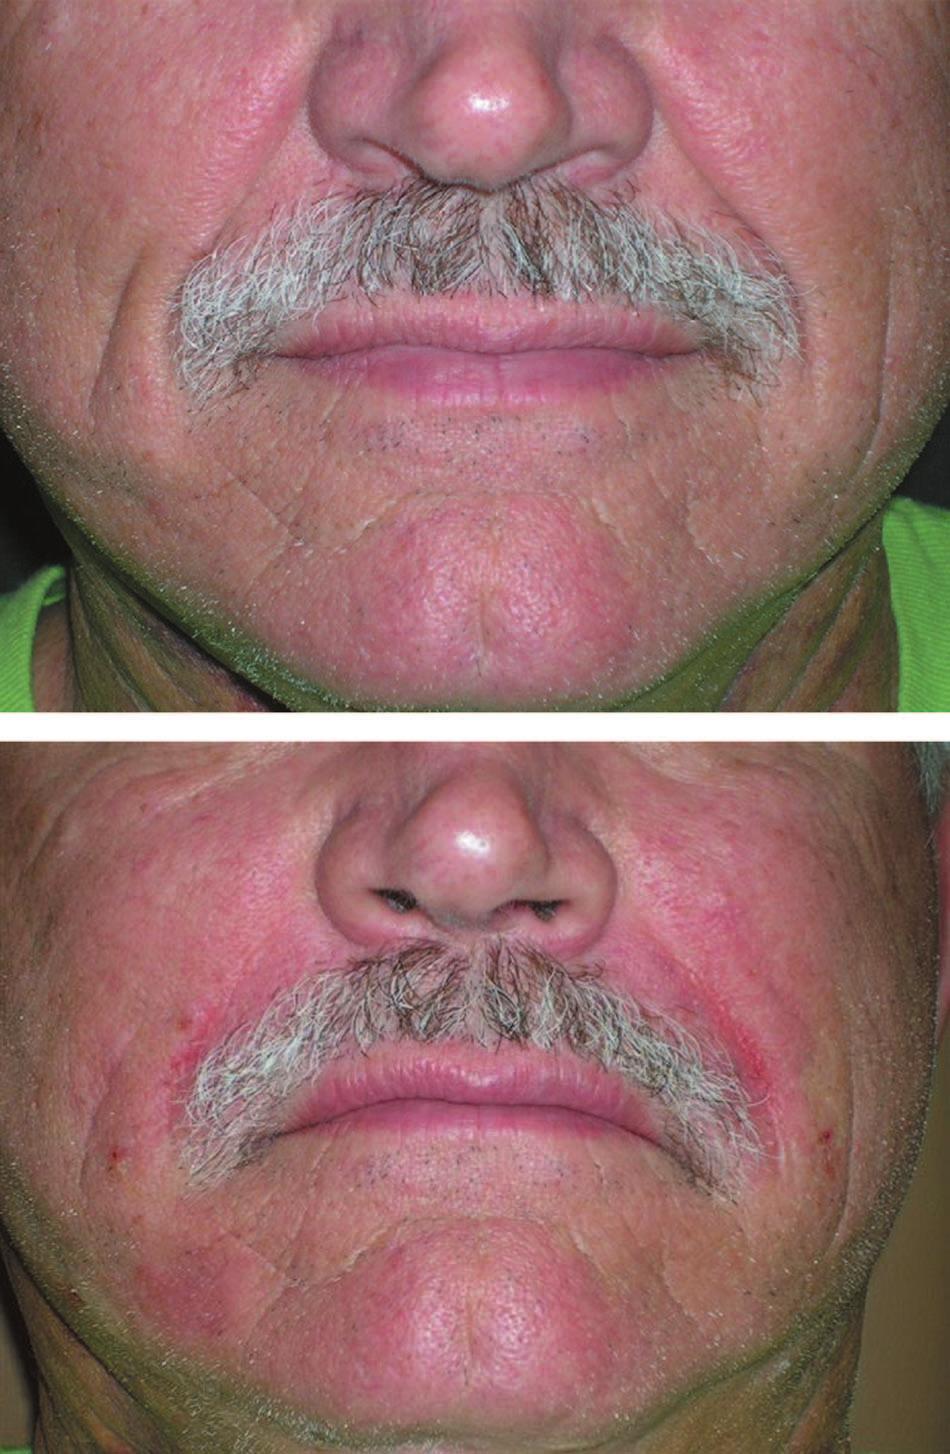 Volume 120, Number 6S Calcium Hydroxylapatite (Radiesse) Fig. 6. A 63-year-old man before and immediately after injection of 2.2 ml of calcium hydroxylapatite for correction of nasolabial folds and 0.